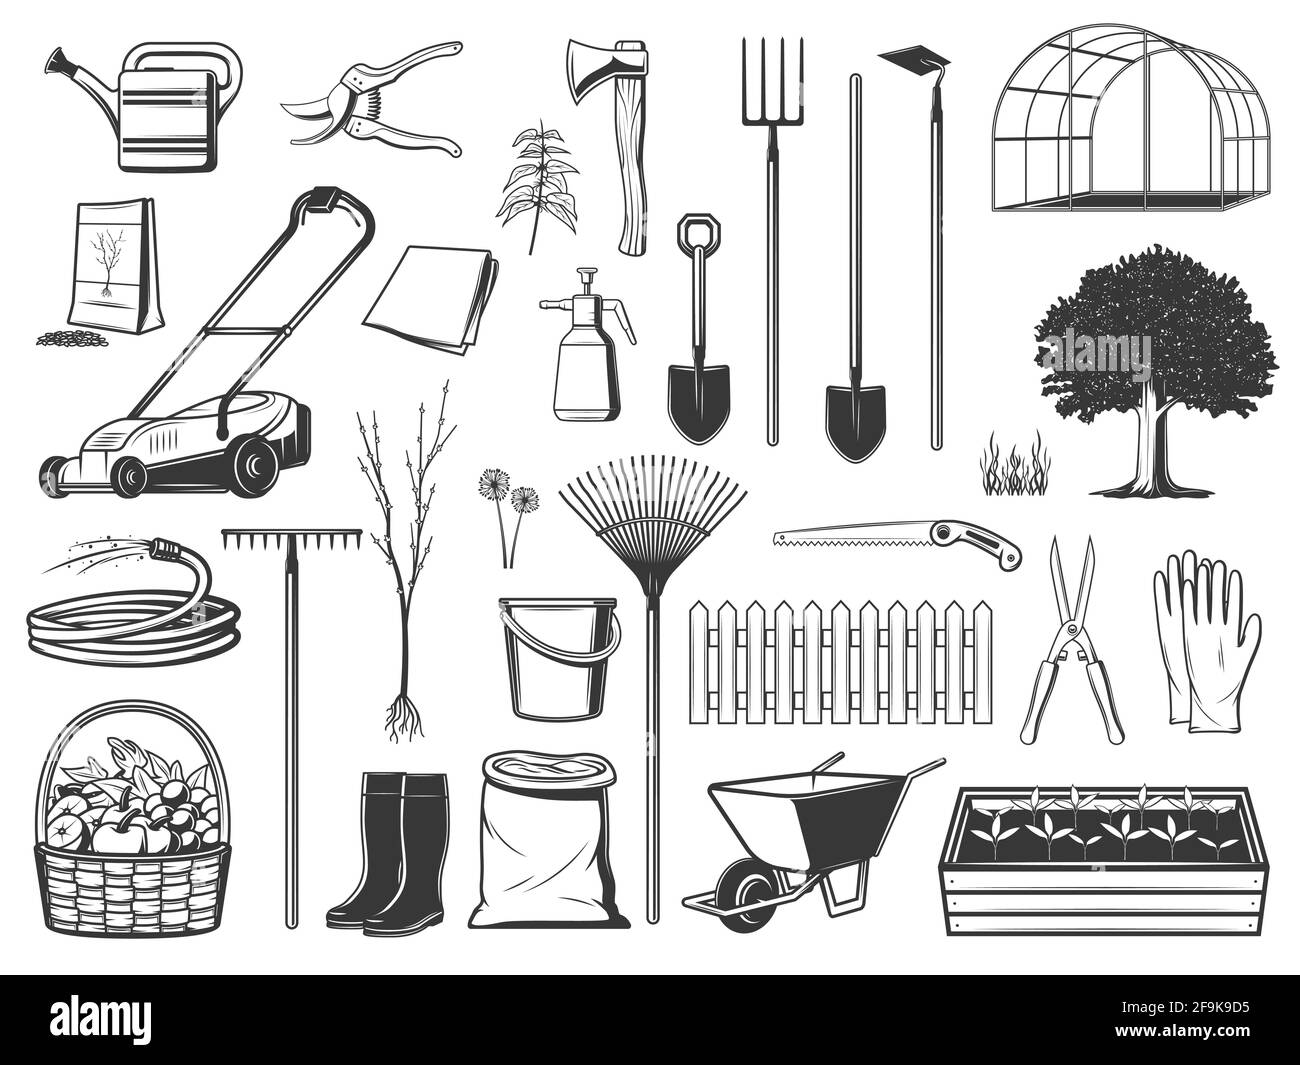 Gardening tools , farming instruments and equipment isolated vector icons. Farmer and gardener shovel, ax, wheelbarrow and saw, boots and gloves. Frui Stock Vector